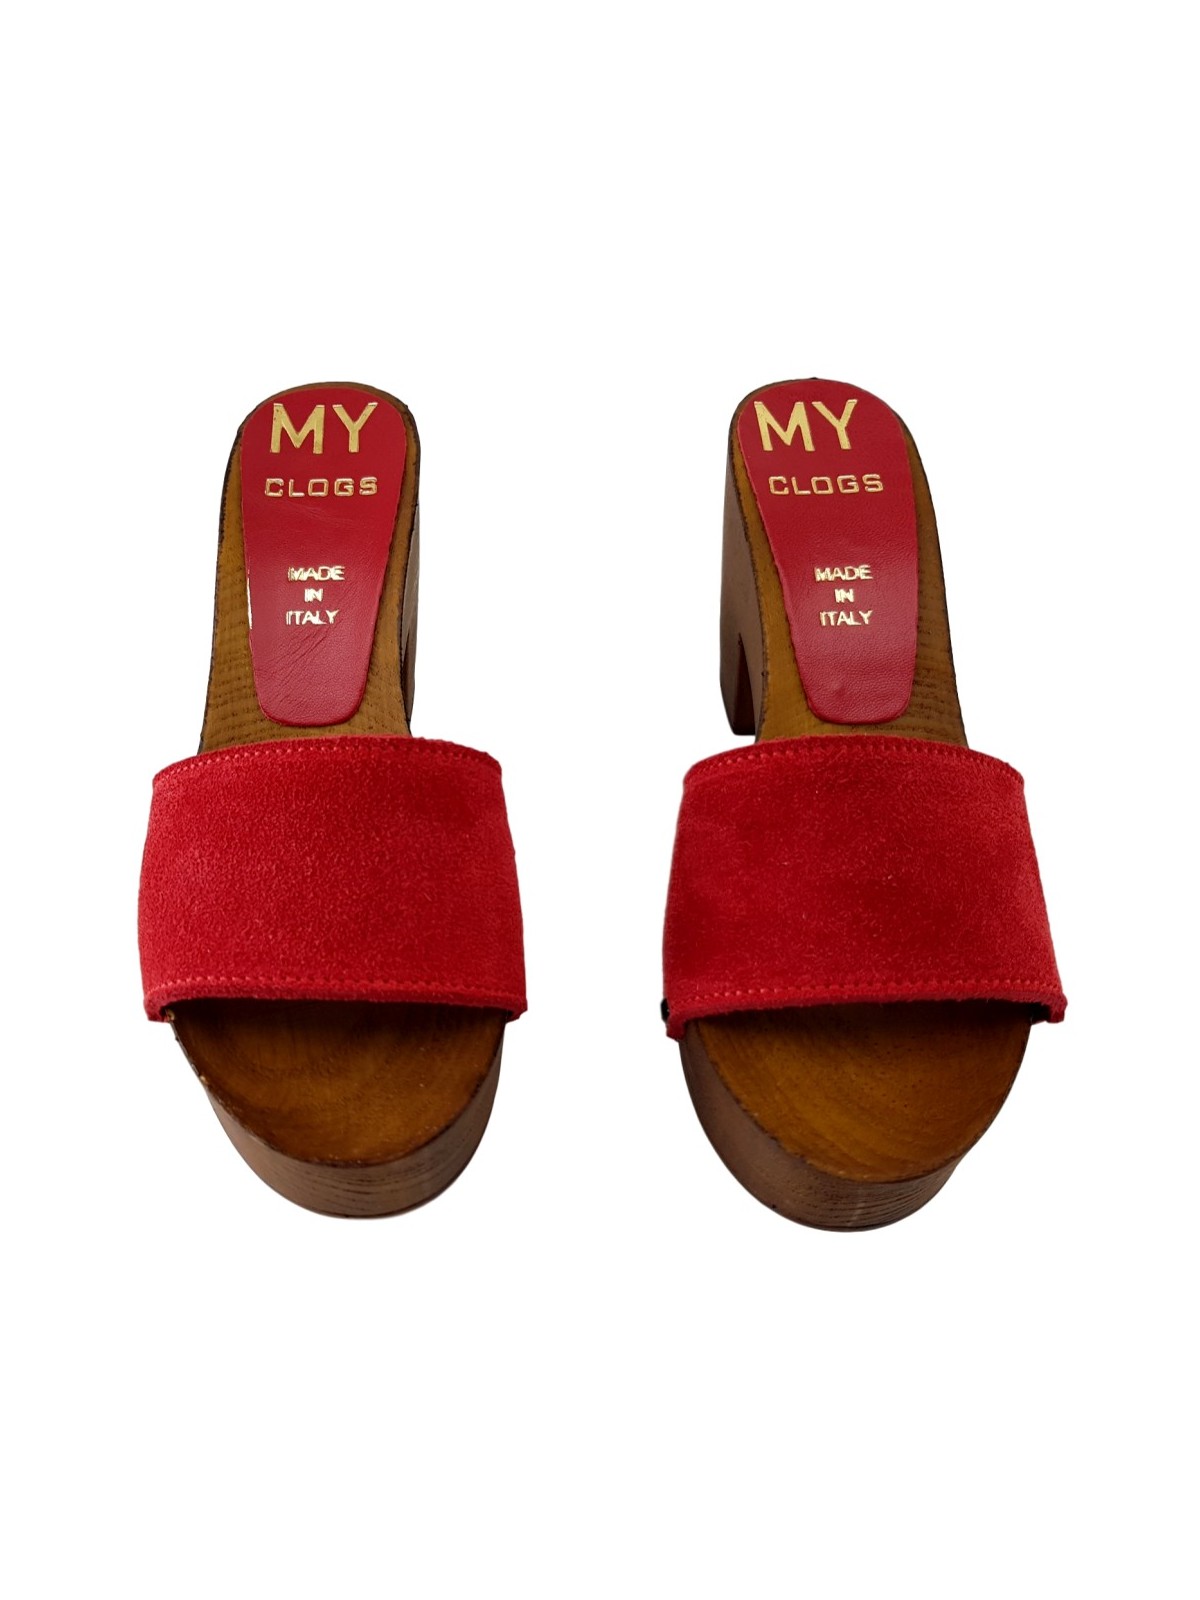 RED SUEDE CLOGS WITH HEEL 9 CM